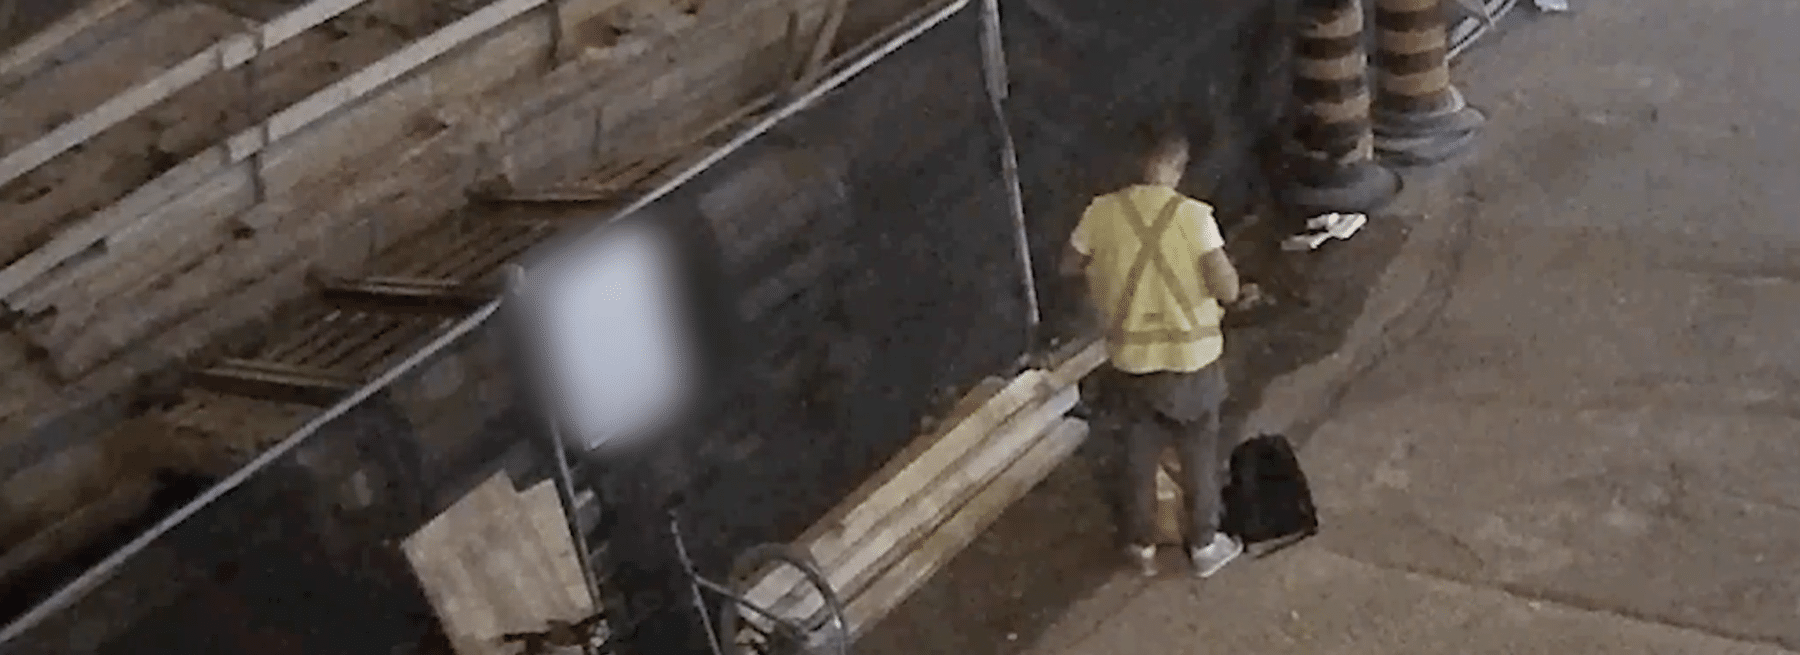 Disguised Construction Trespasser Gets Arrested